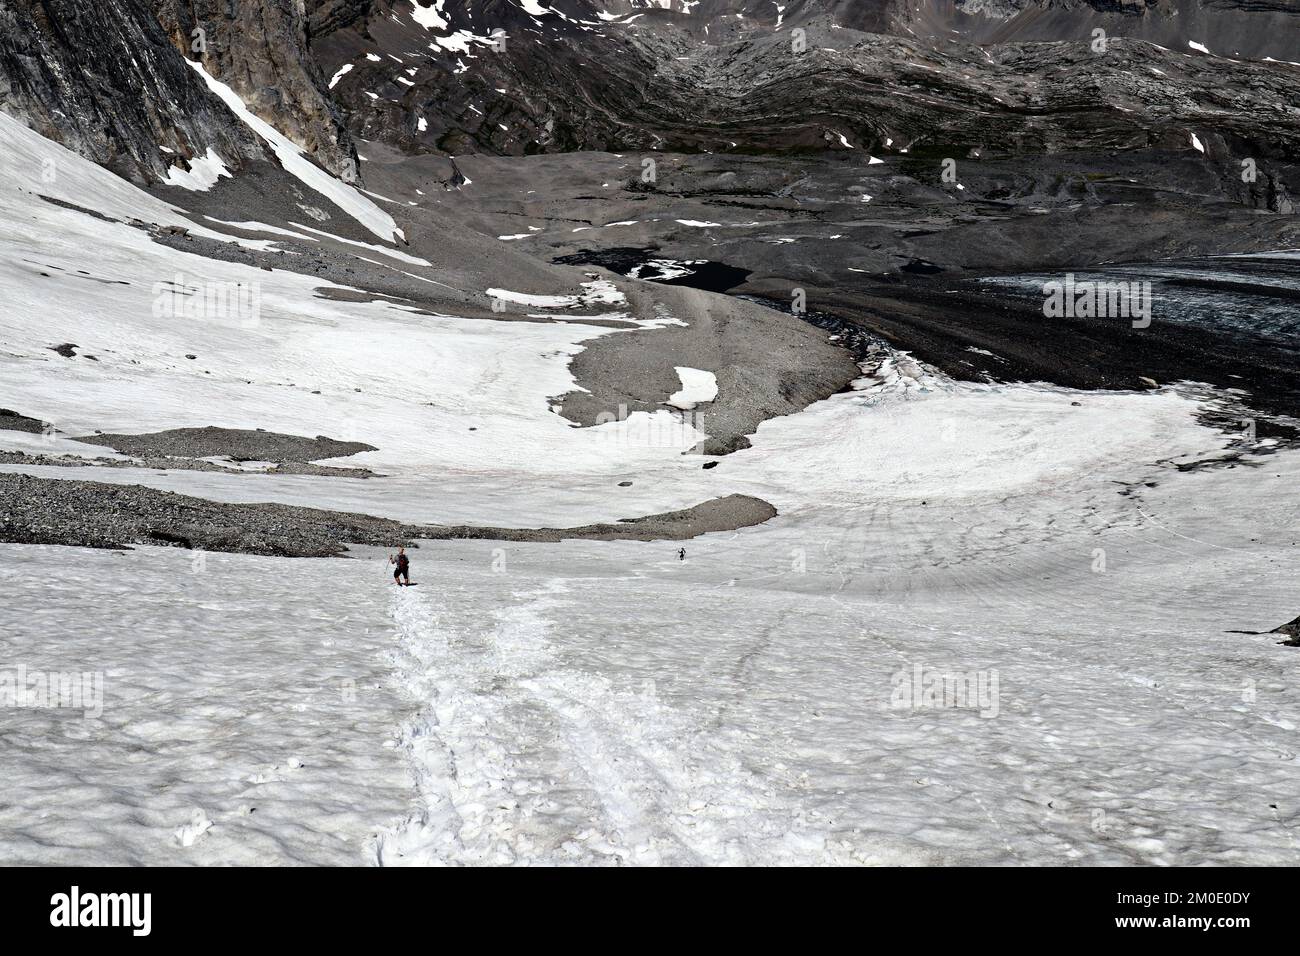 Hiking through the glaciers, rocks, and wildflowers on Petain Glacier. Stock Photo